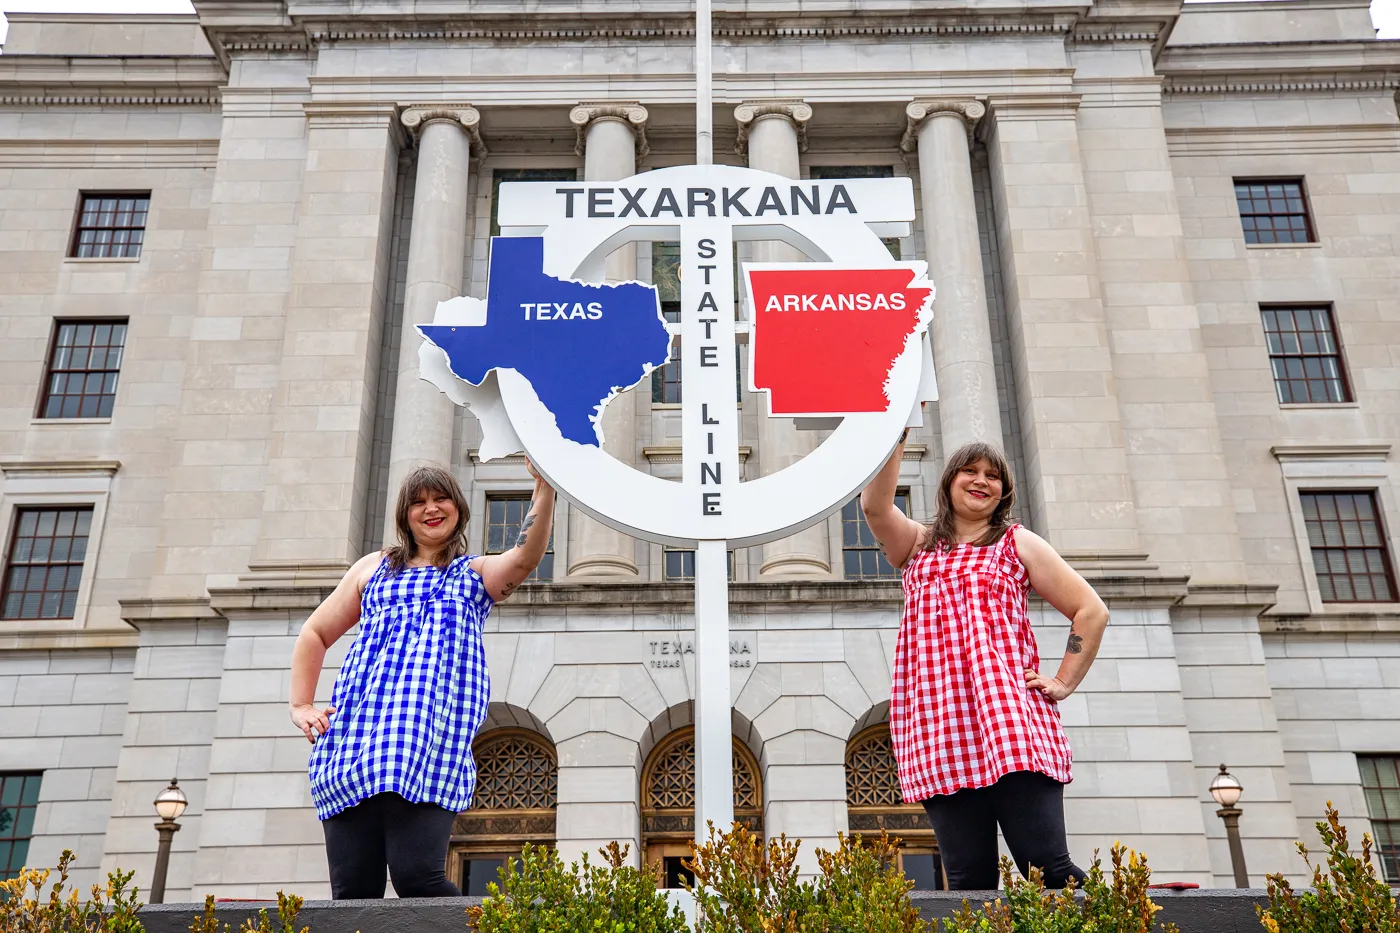 Texarkana State Line Sign at the post office that straddled the Texas and Arkansas borders